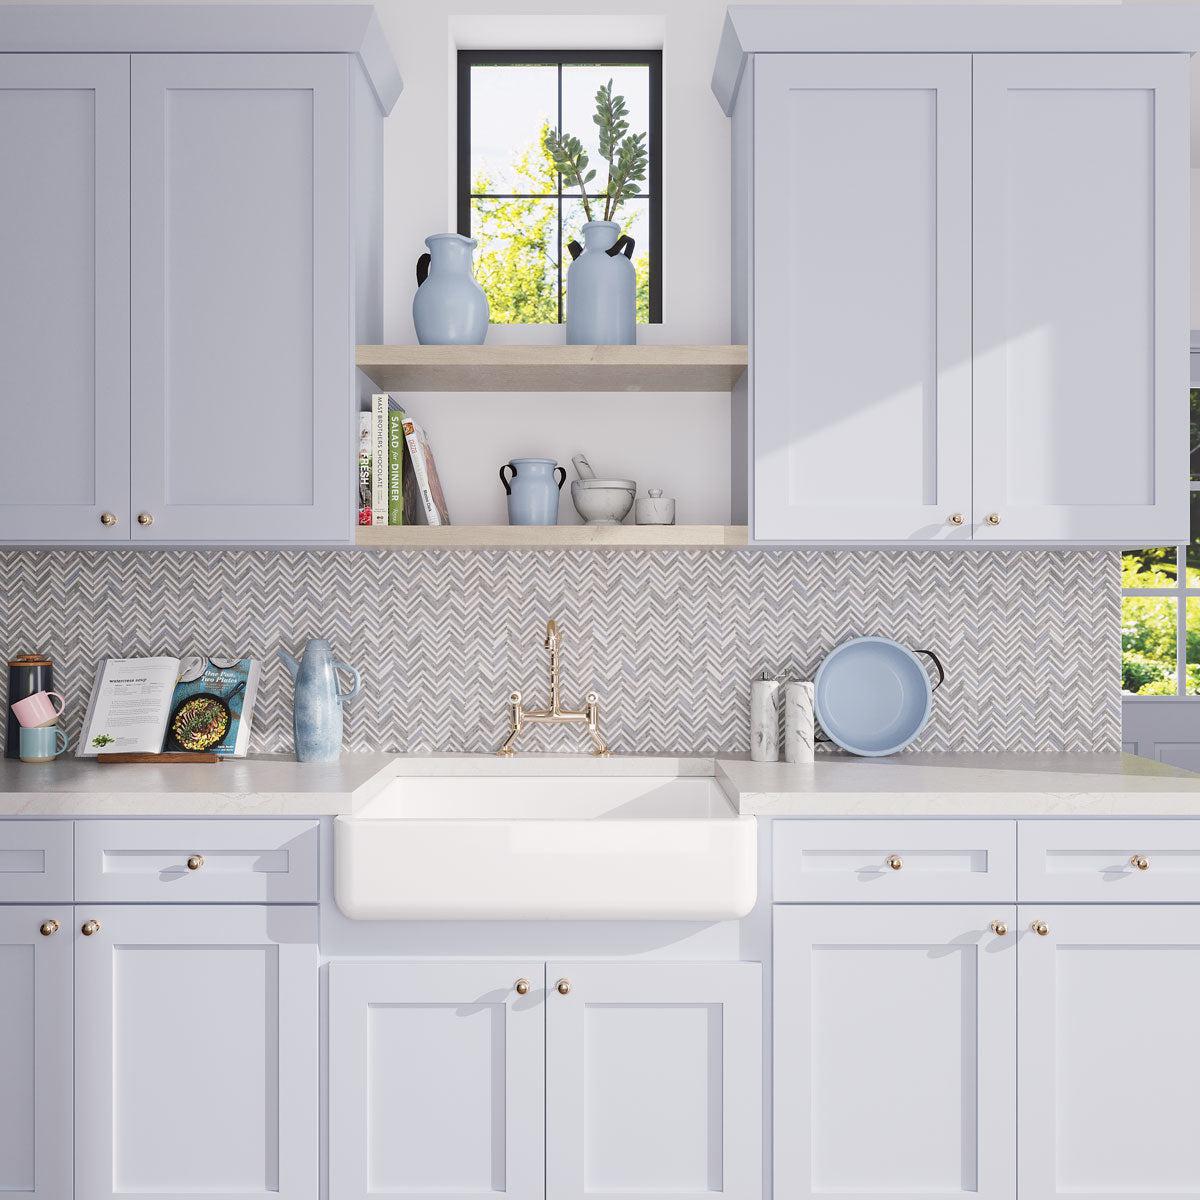 Blue and white kitchen with marble chevon mosaic tile